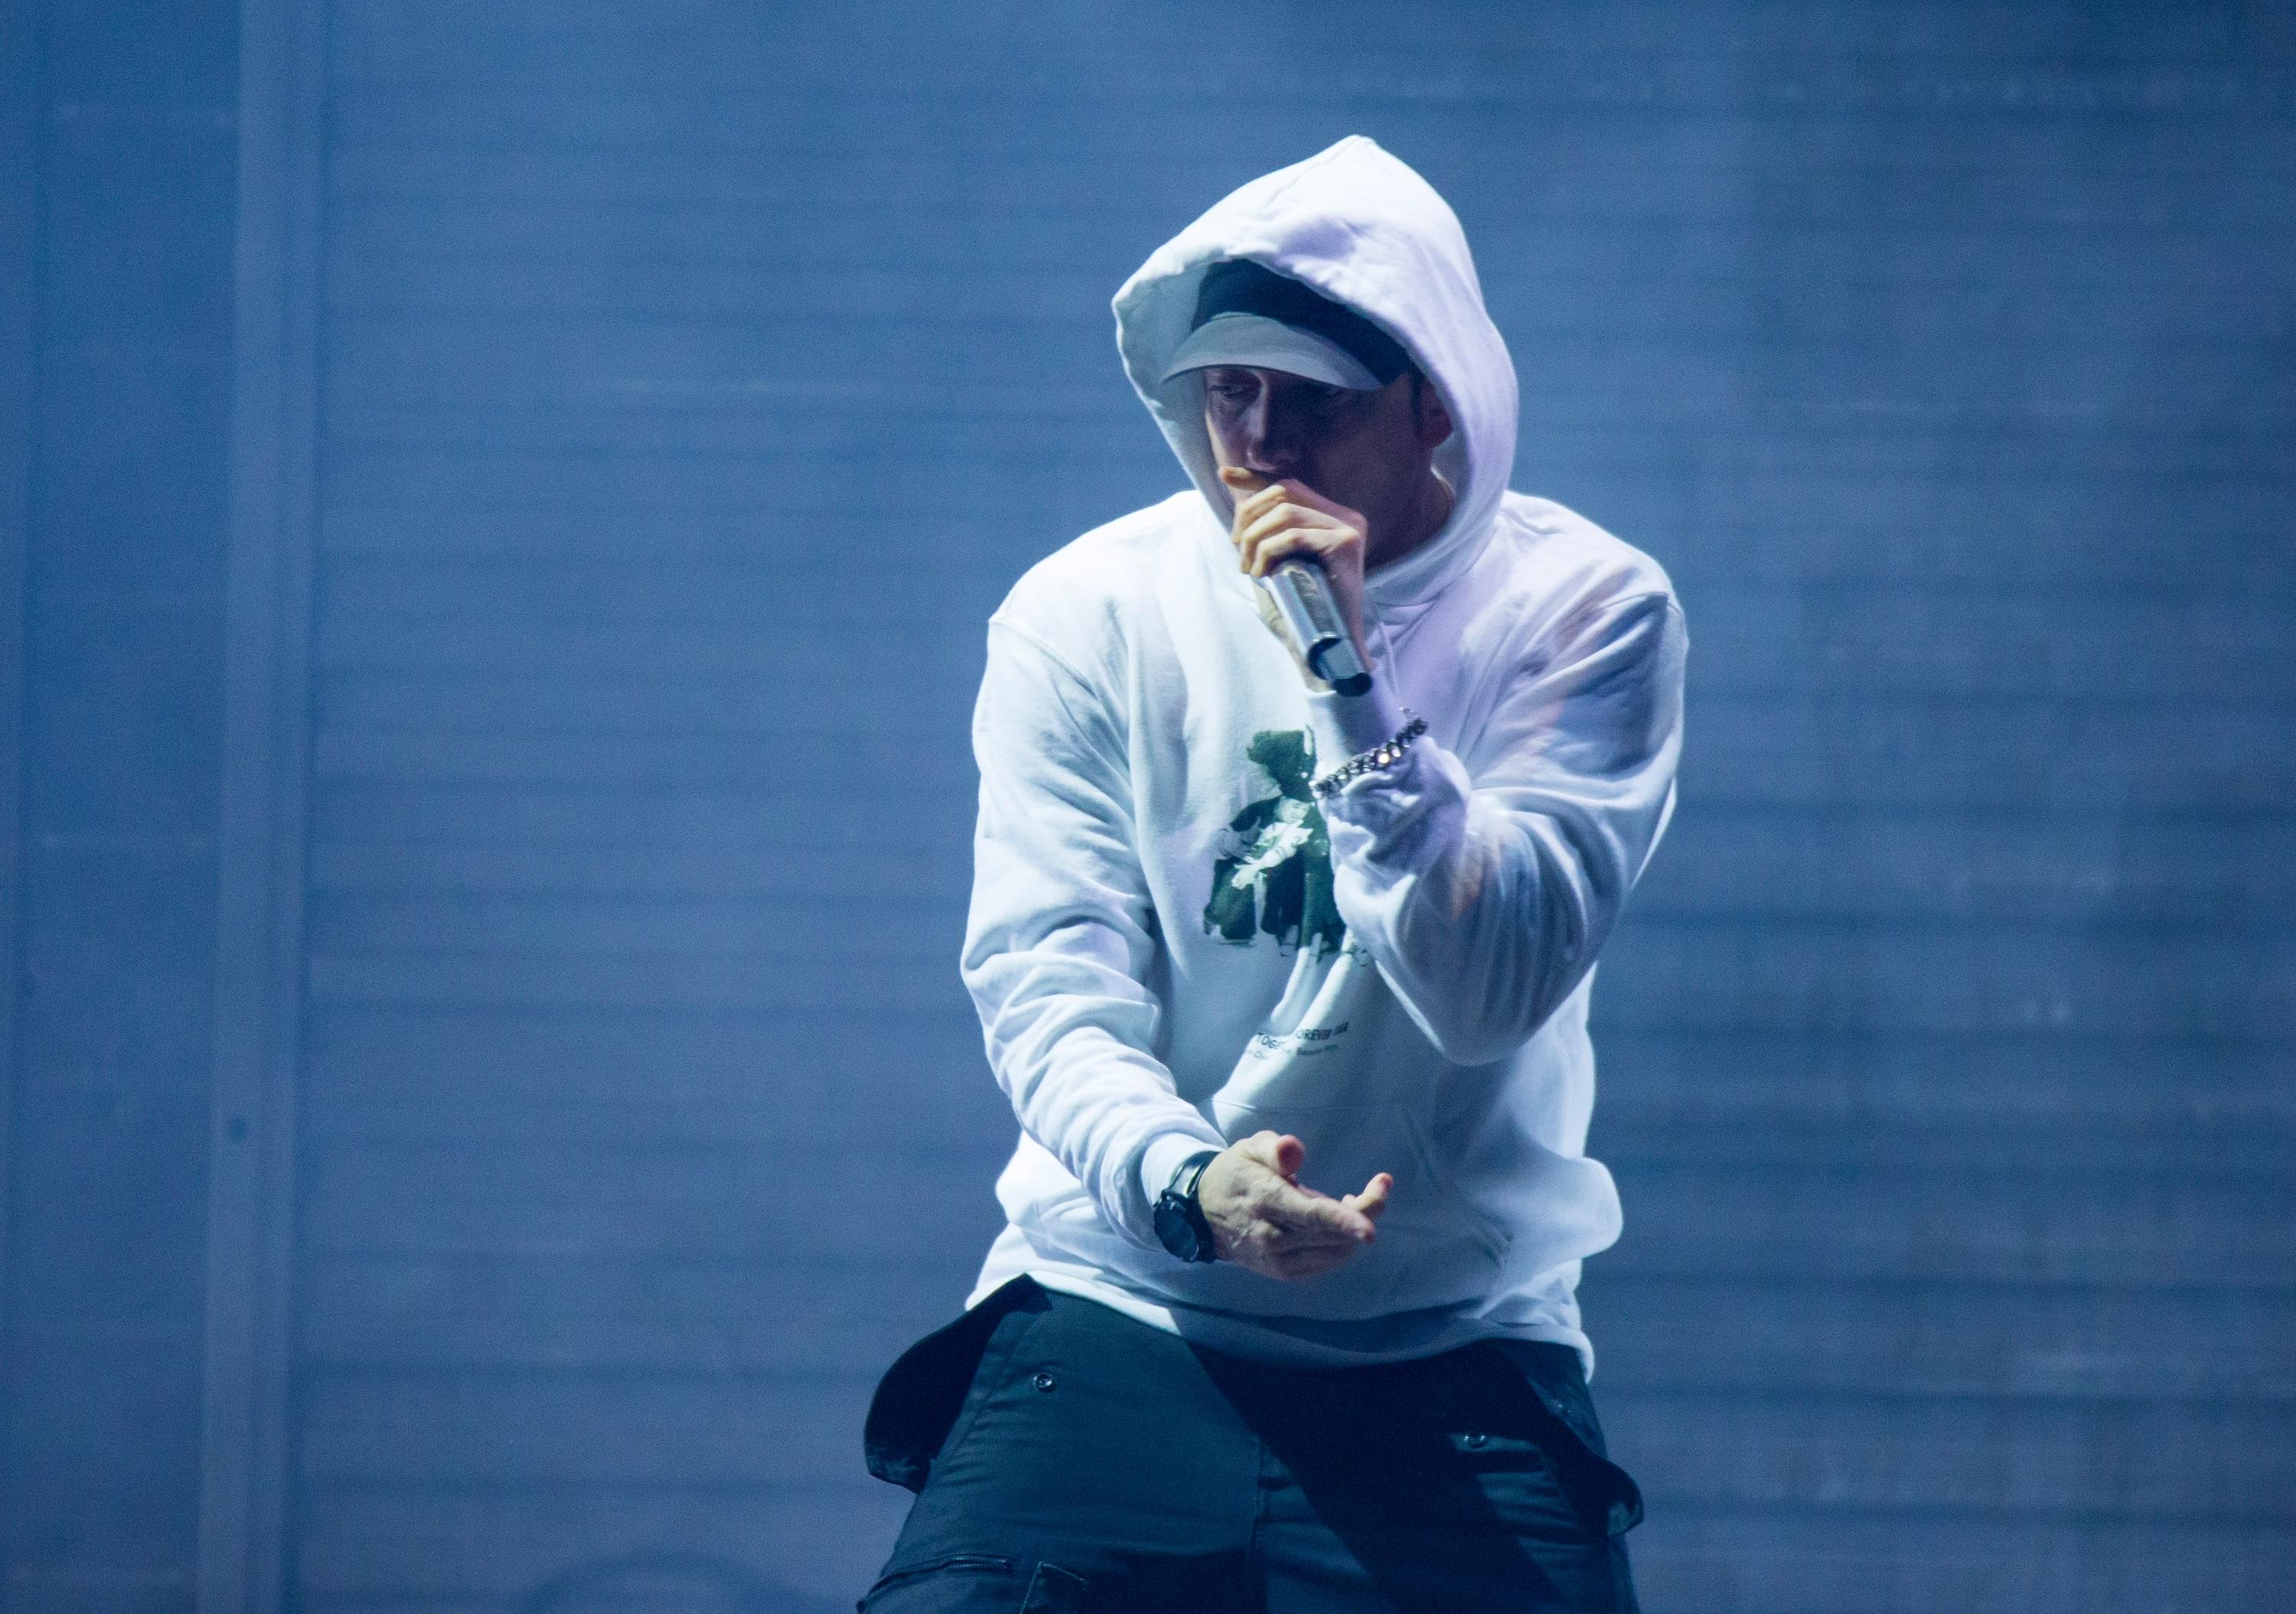 Eminem Produced A New Film About Battle Rapping Called “Bodied” [WATCH]